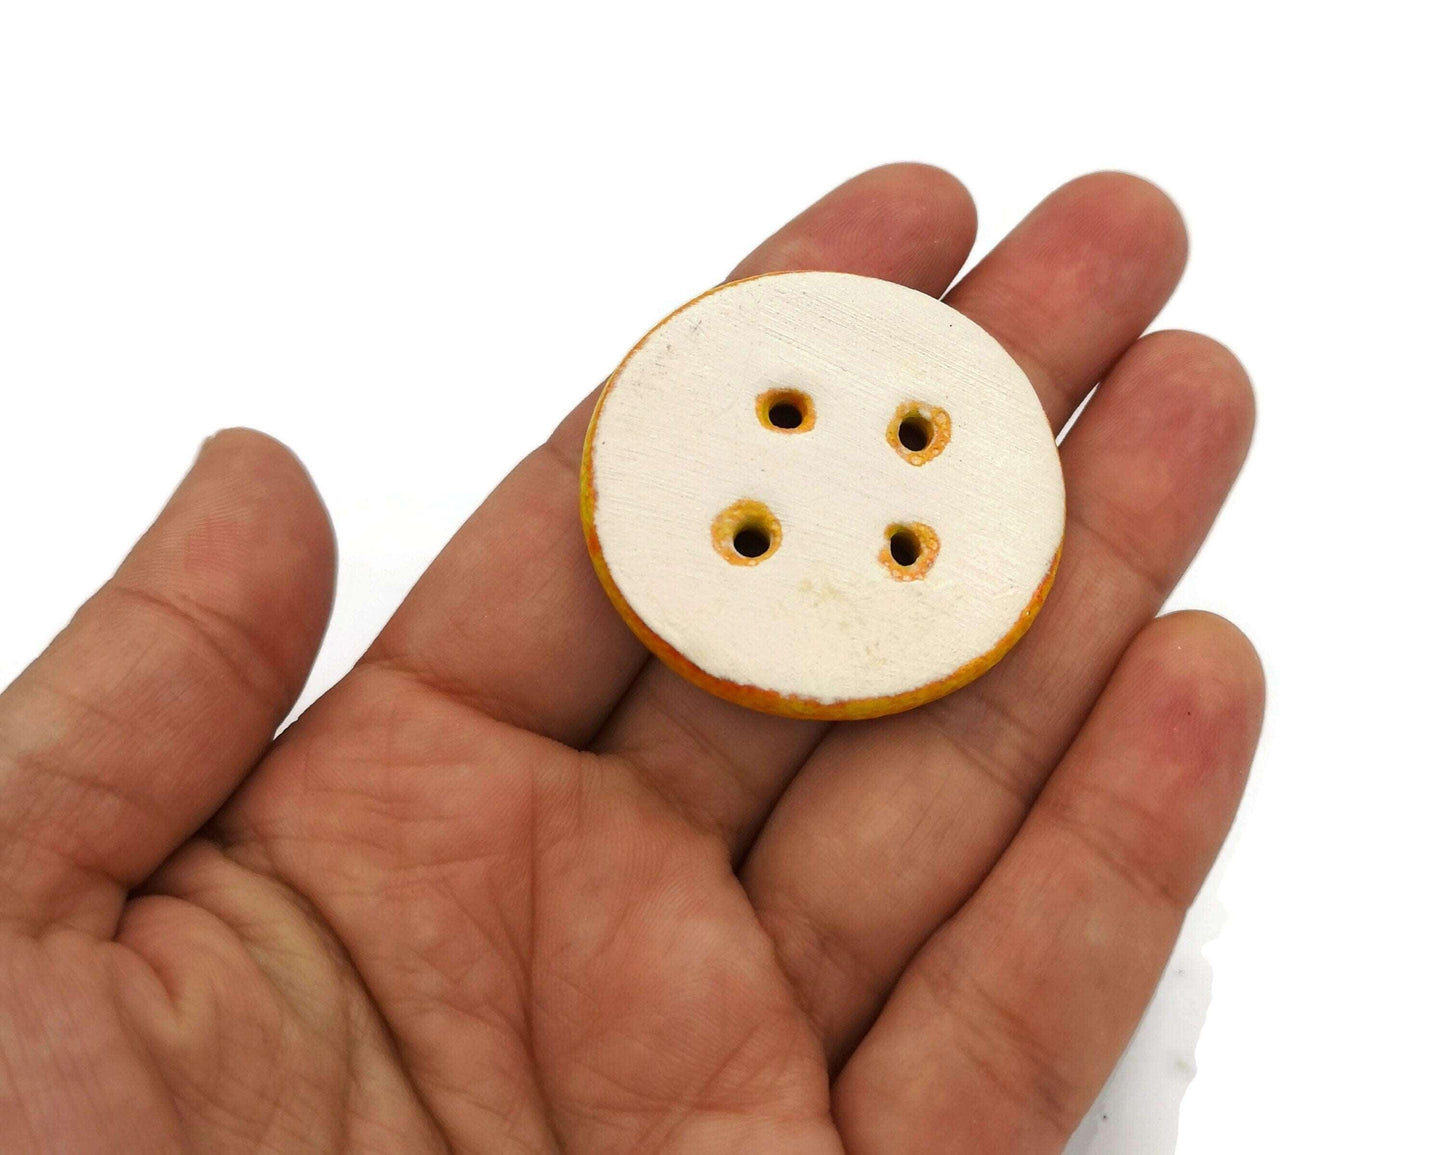 1Pc Extra Large Sewing Buttons Handmade Ceramic Novelty Buttons 40mm, Unique Round Buttons For Coat